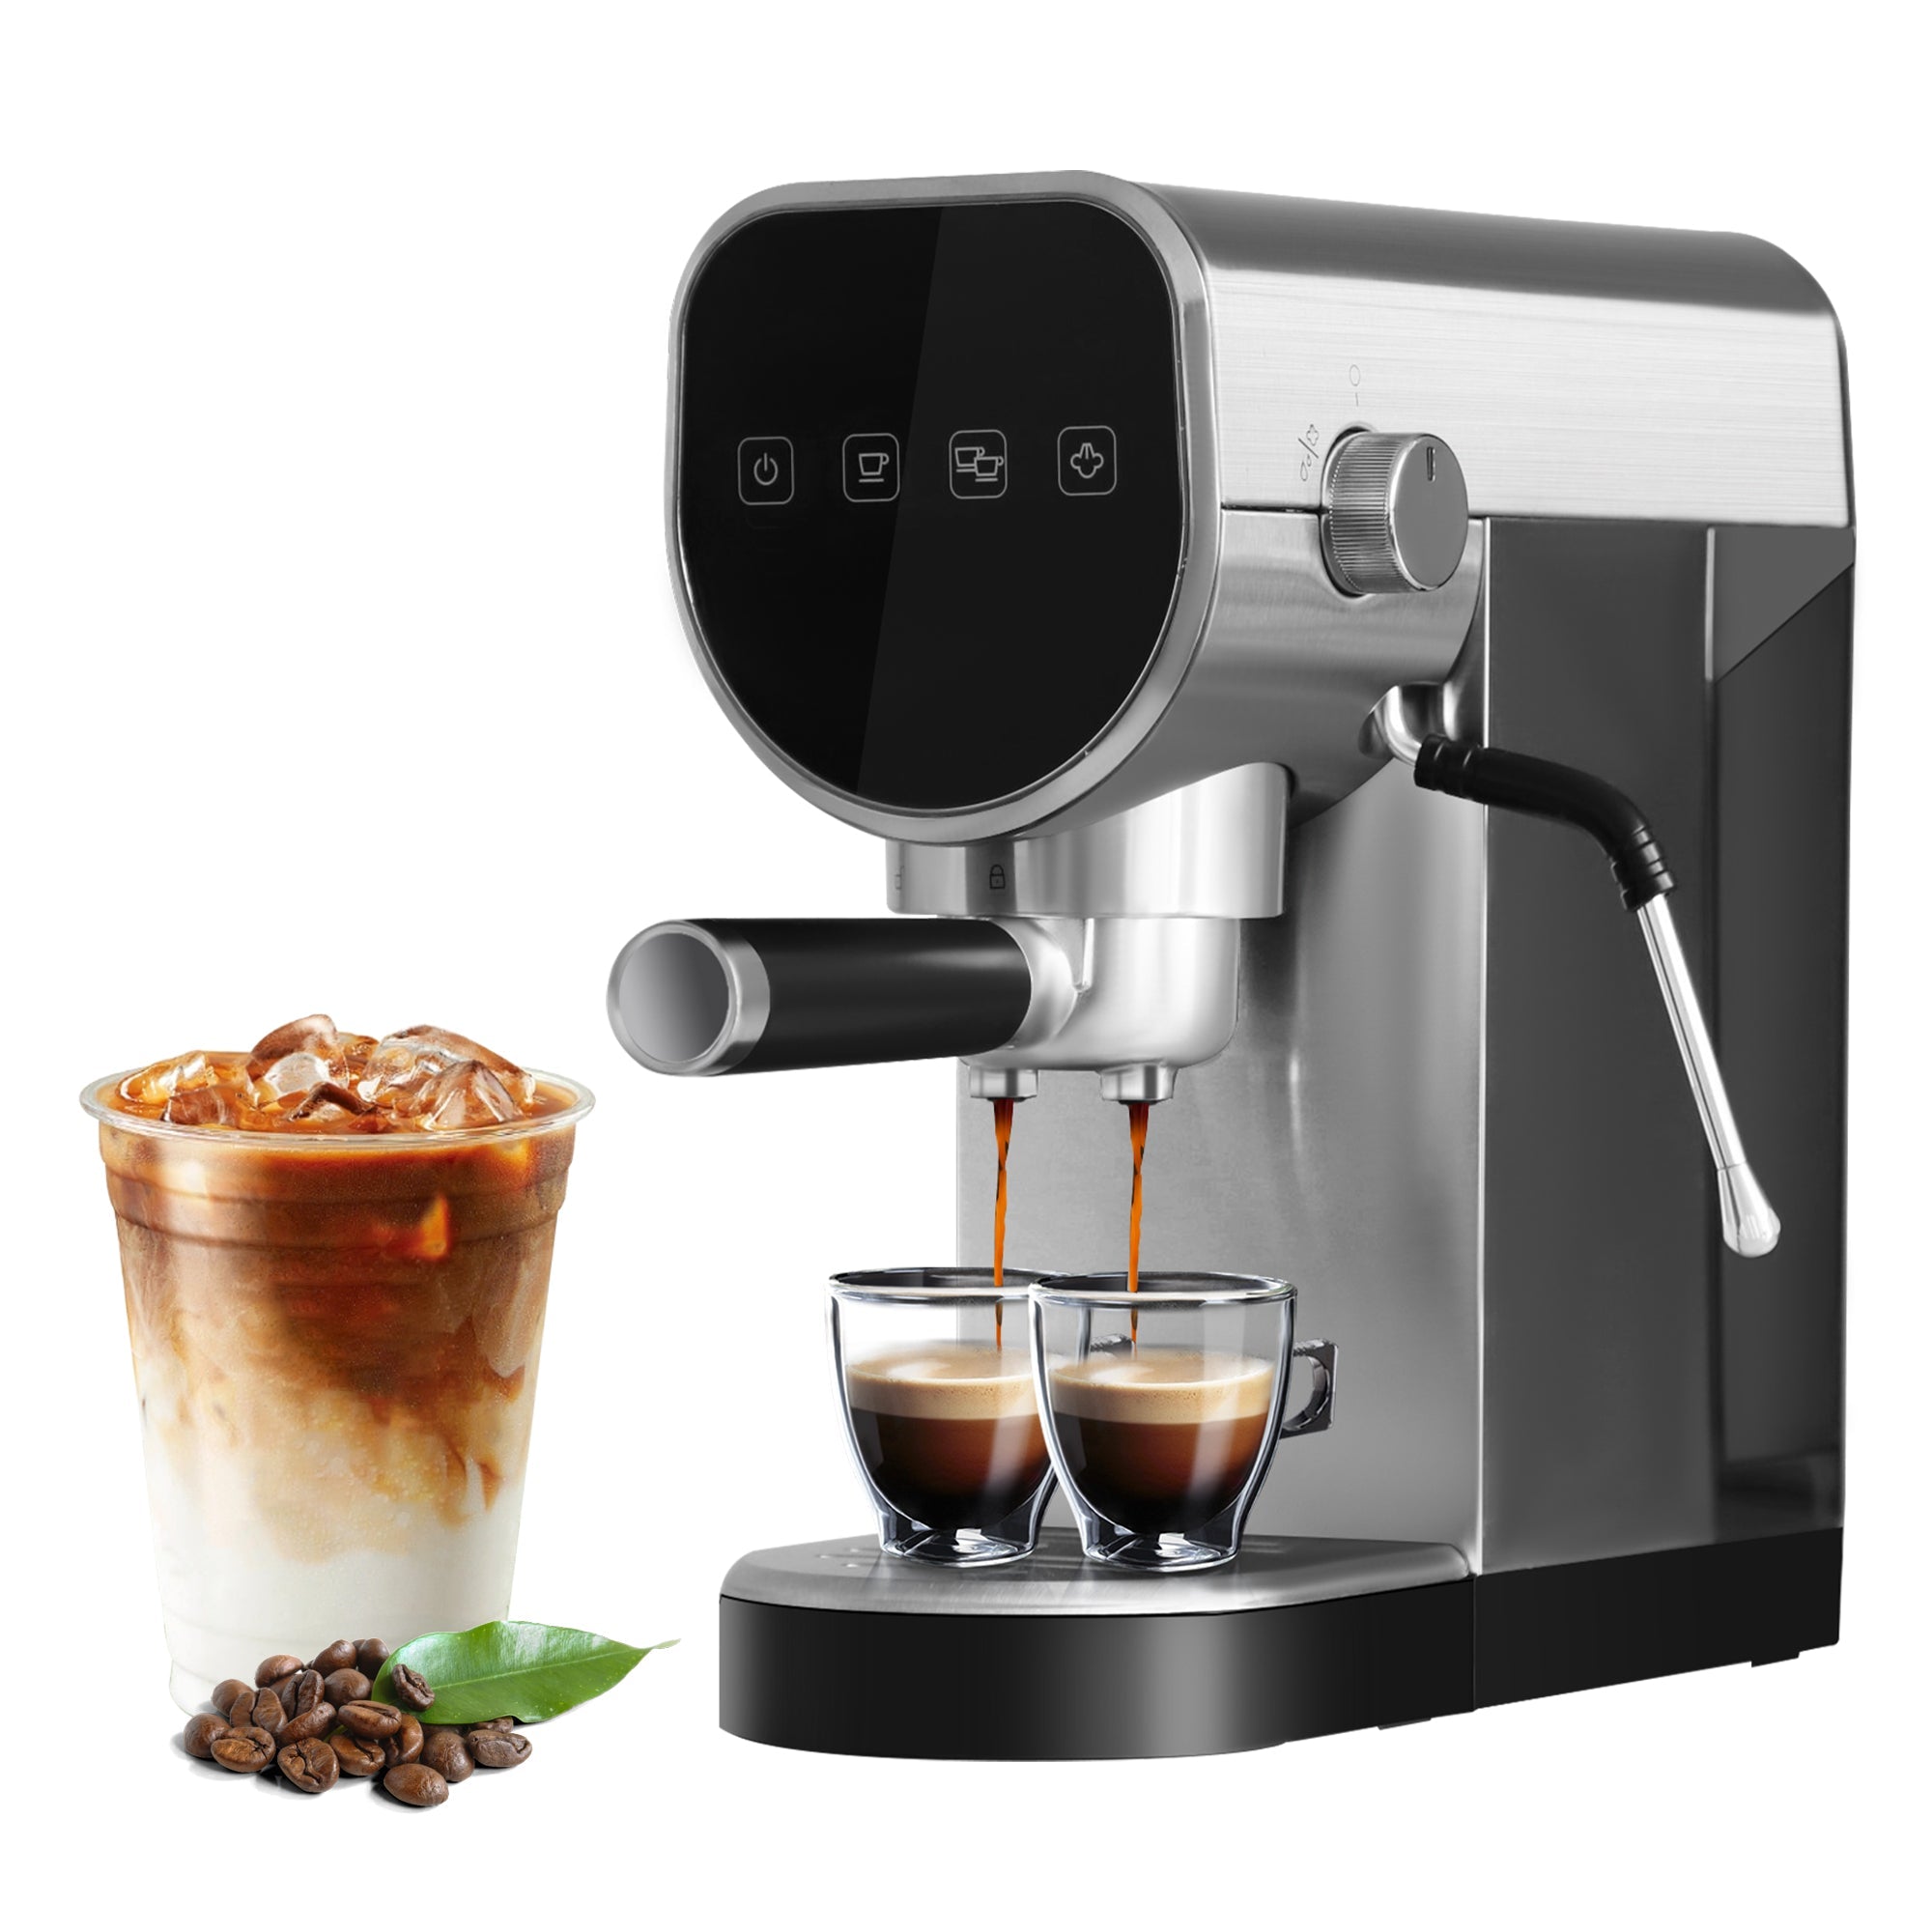 Espresso Machine 20-Bar Pump Manual Coffee Maker with Milk Frother Steam Wand